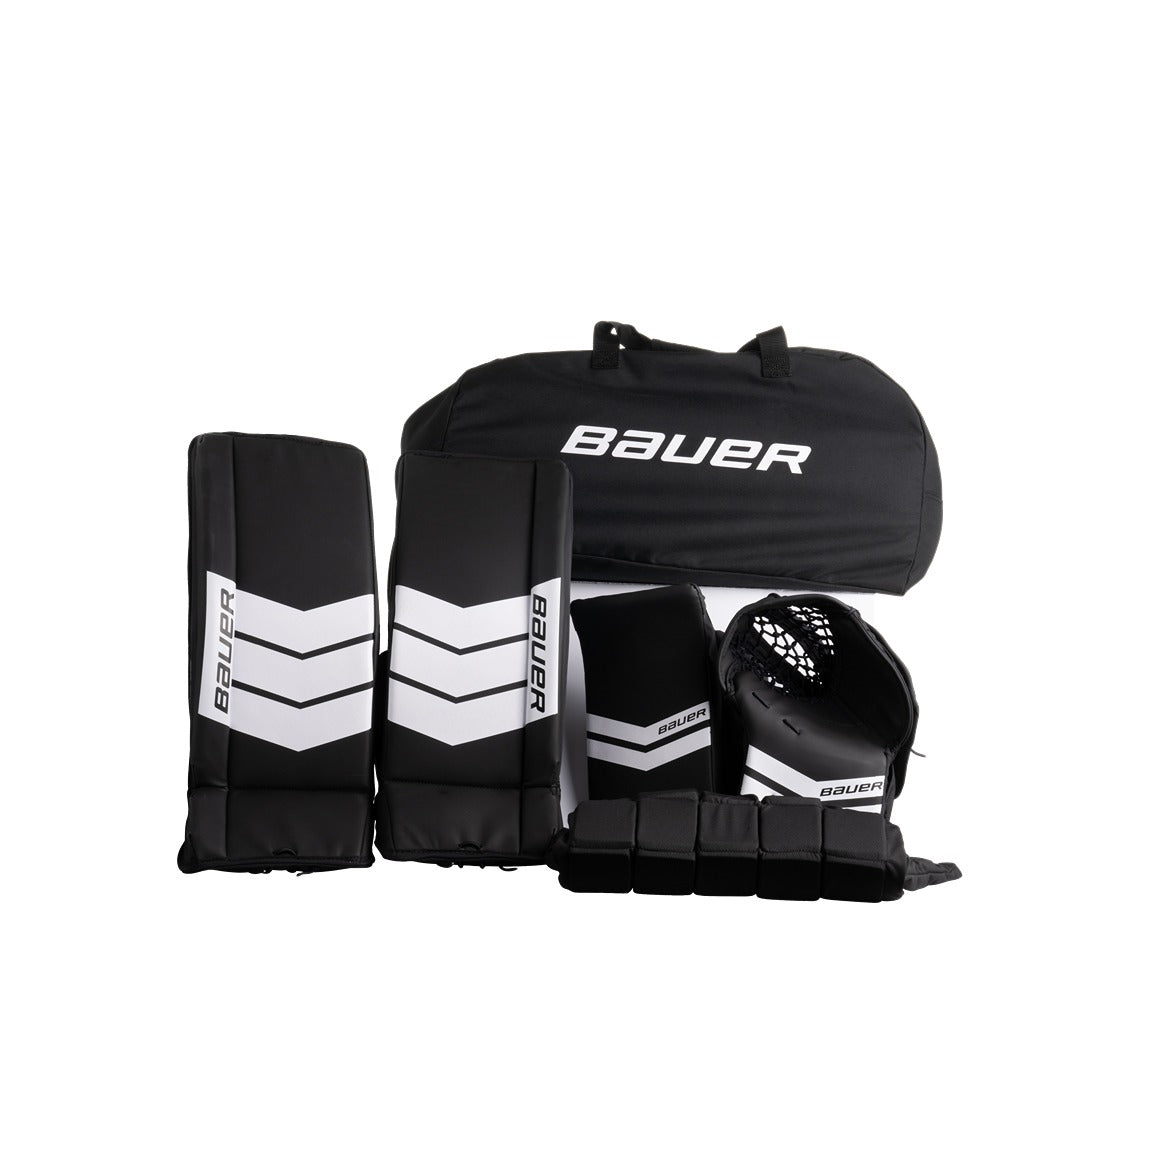 Bauer Learn To Save Goalie Set - Youth